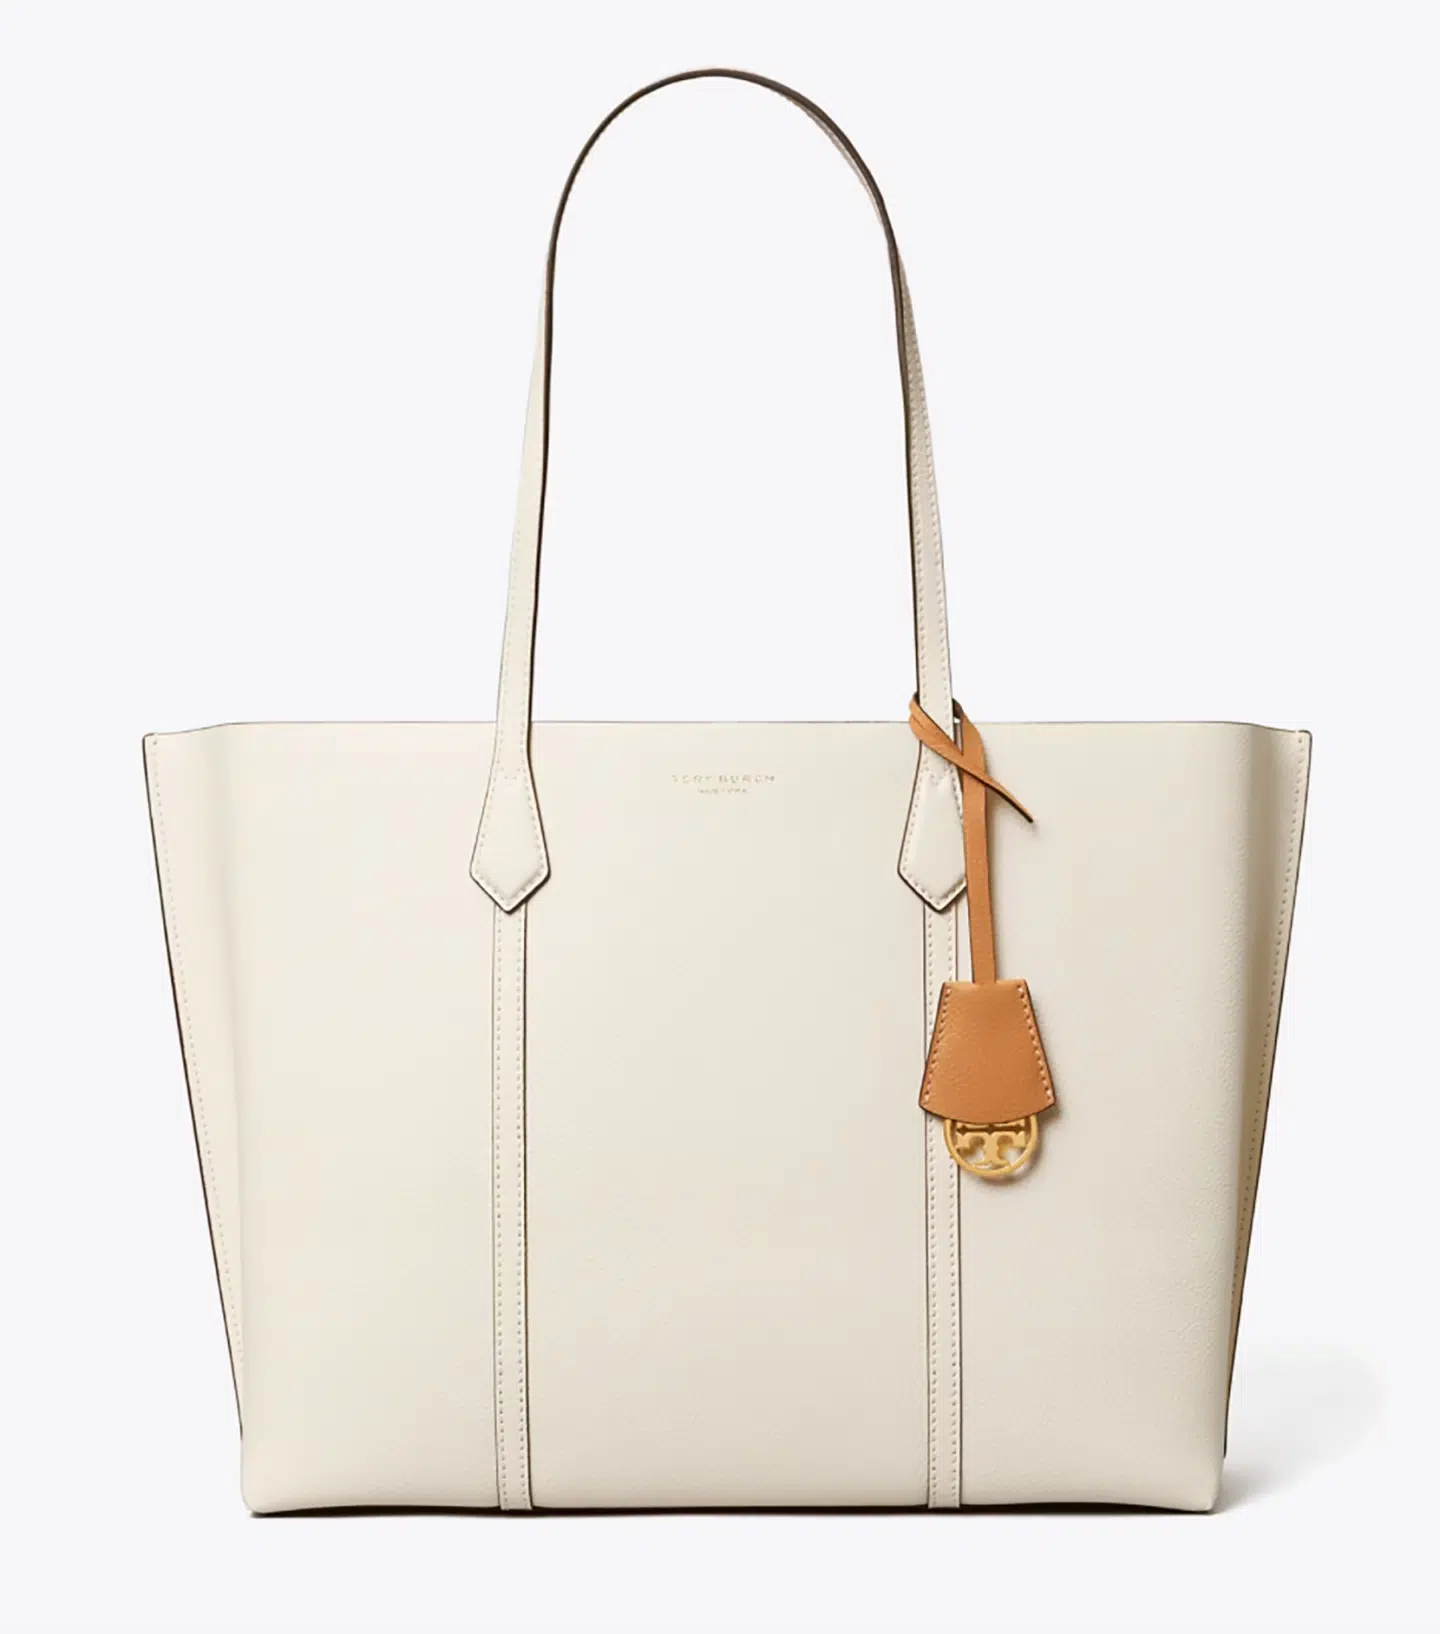 The 10 Best Designer Tote Bags for Work and Travel 